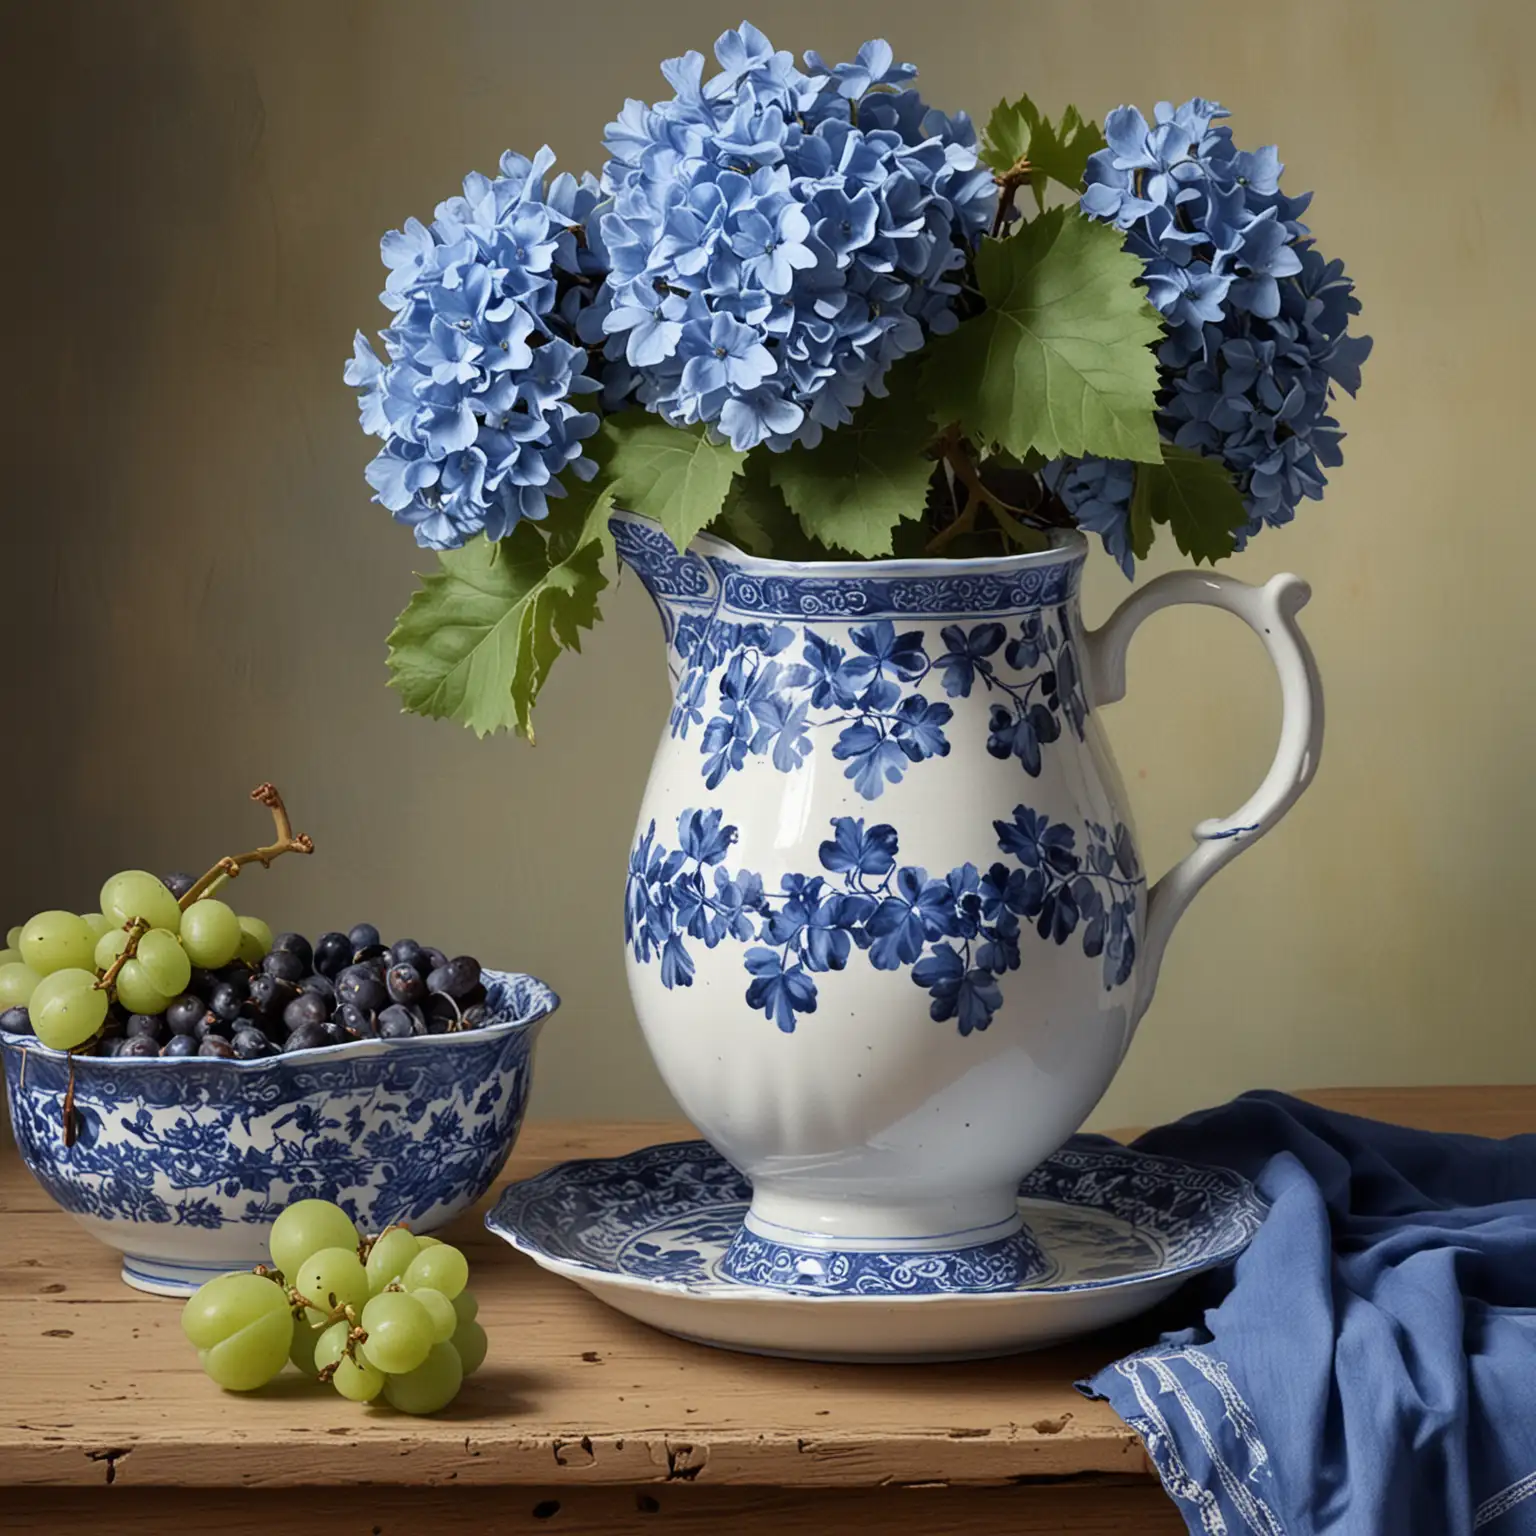 Blue and White Still Life Pitcher Hydrangeas Cup Saucer and Grapes